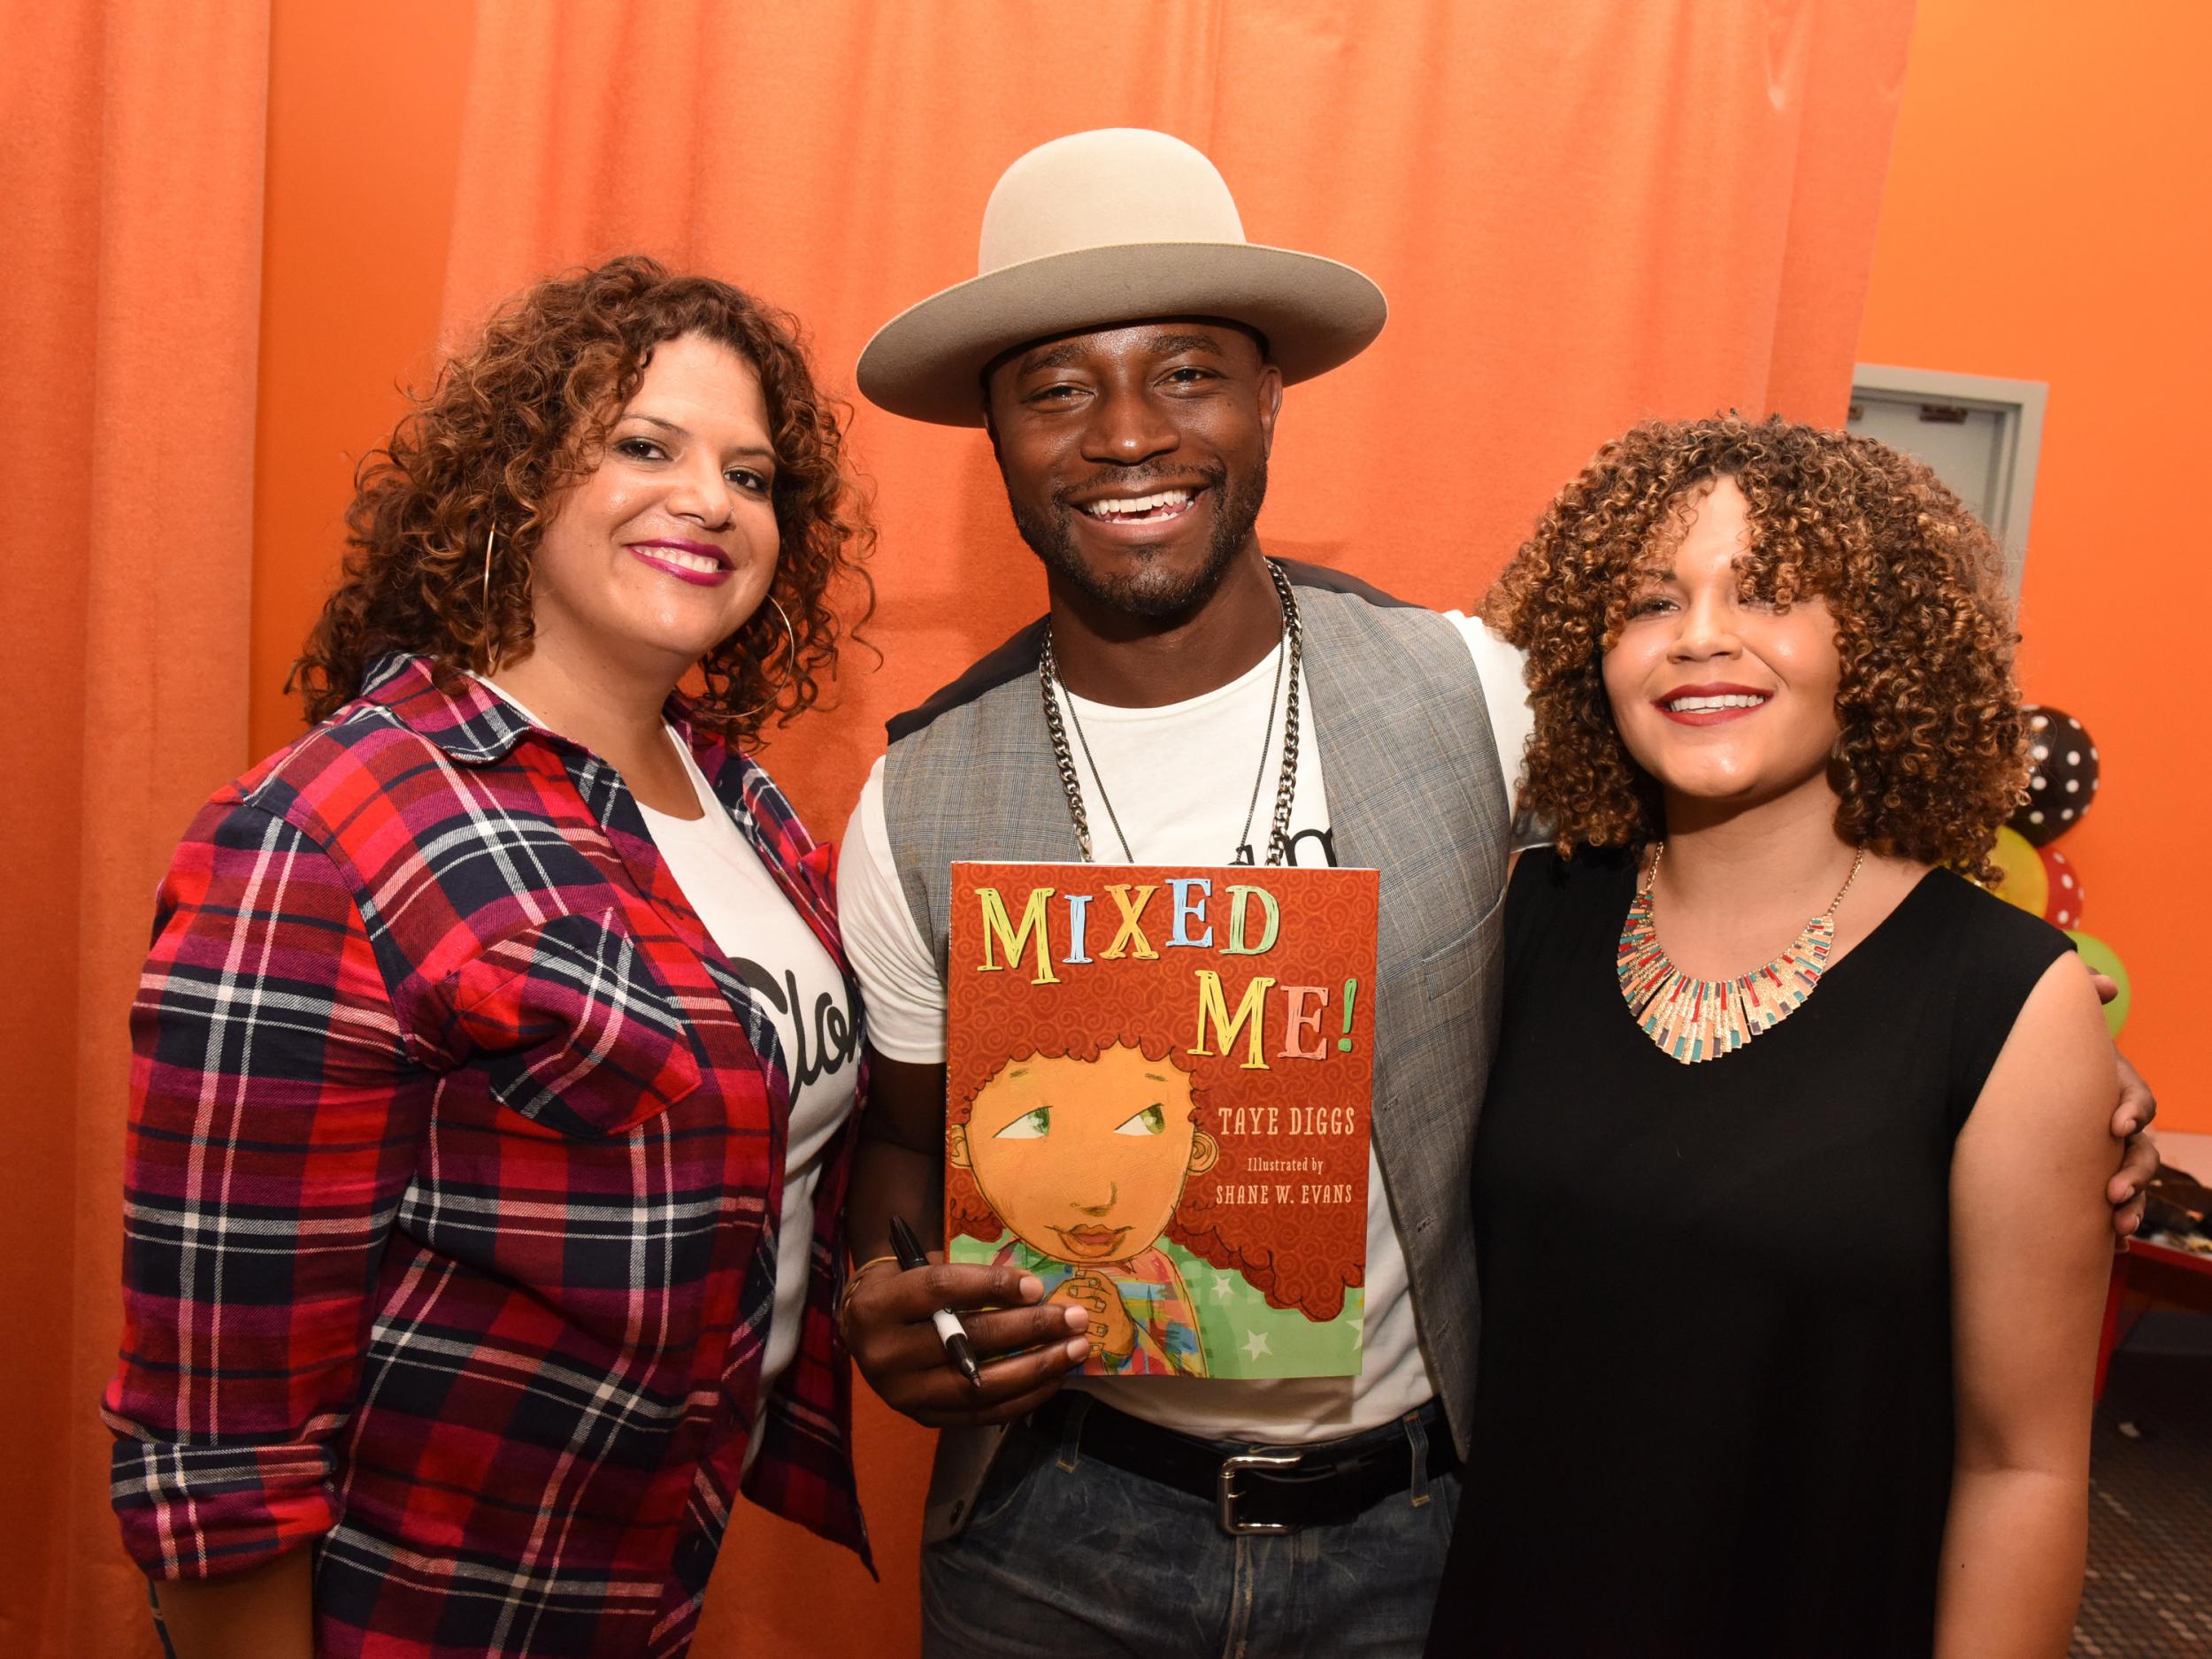 Fashion designer Sonia Smith-Kang, actor Taye Diggs and Kristen Marston of Mixed-ology attend the Mixed Me Book Launch + Multiculti Mixer